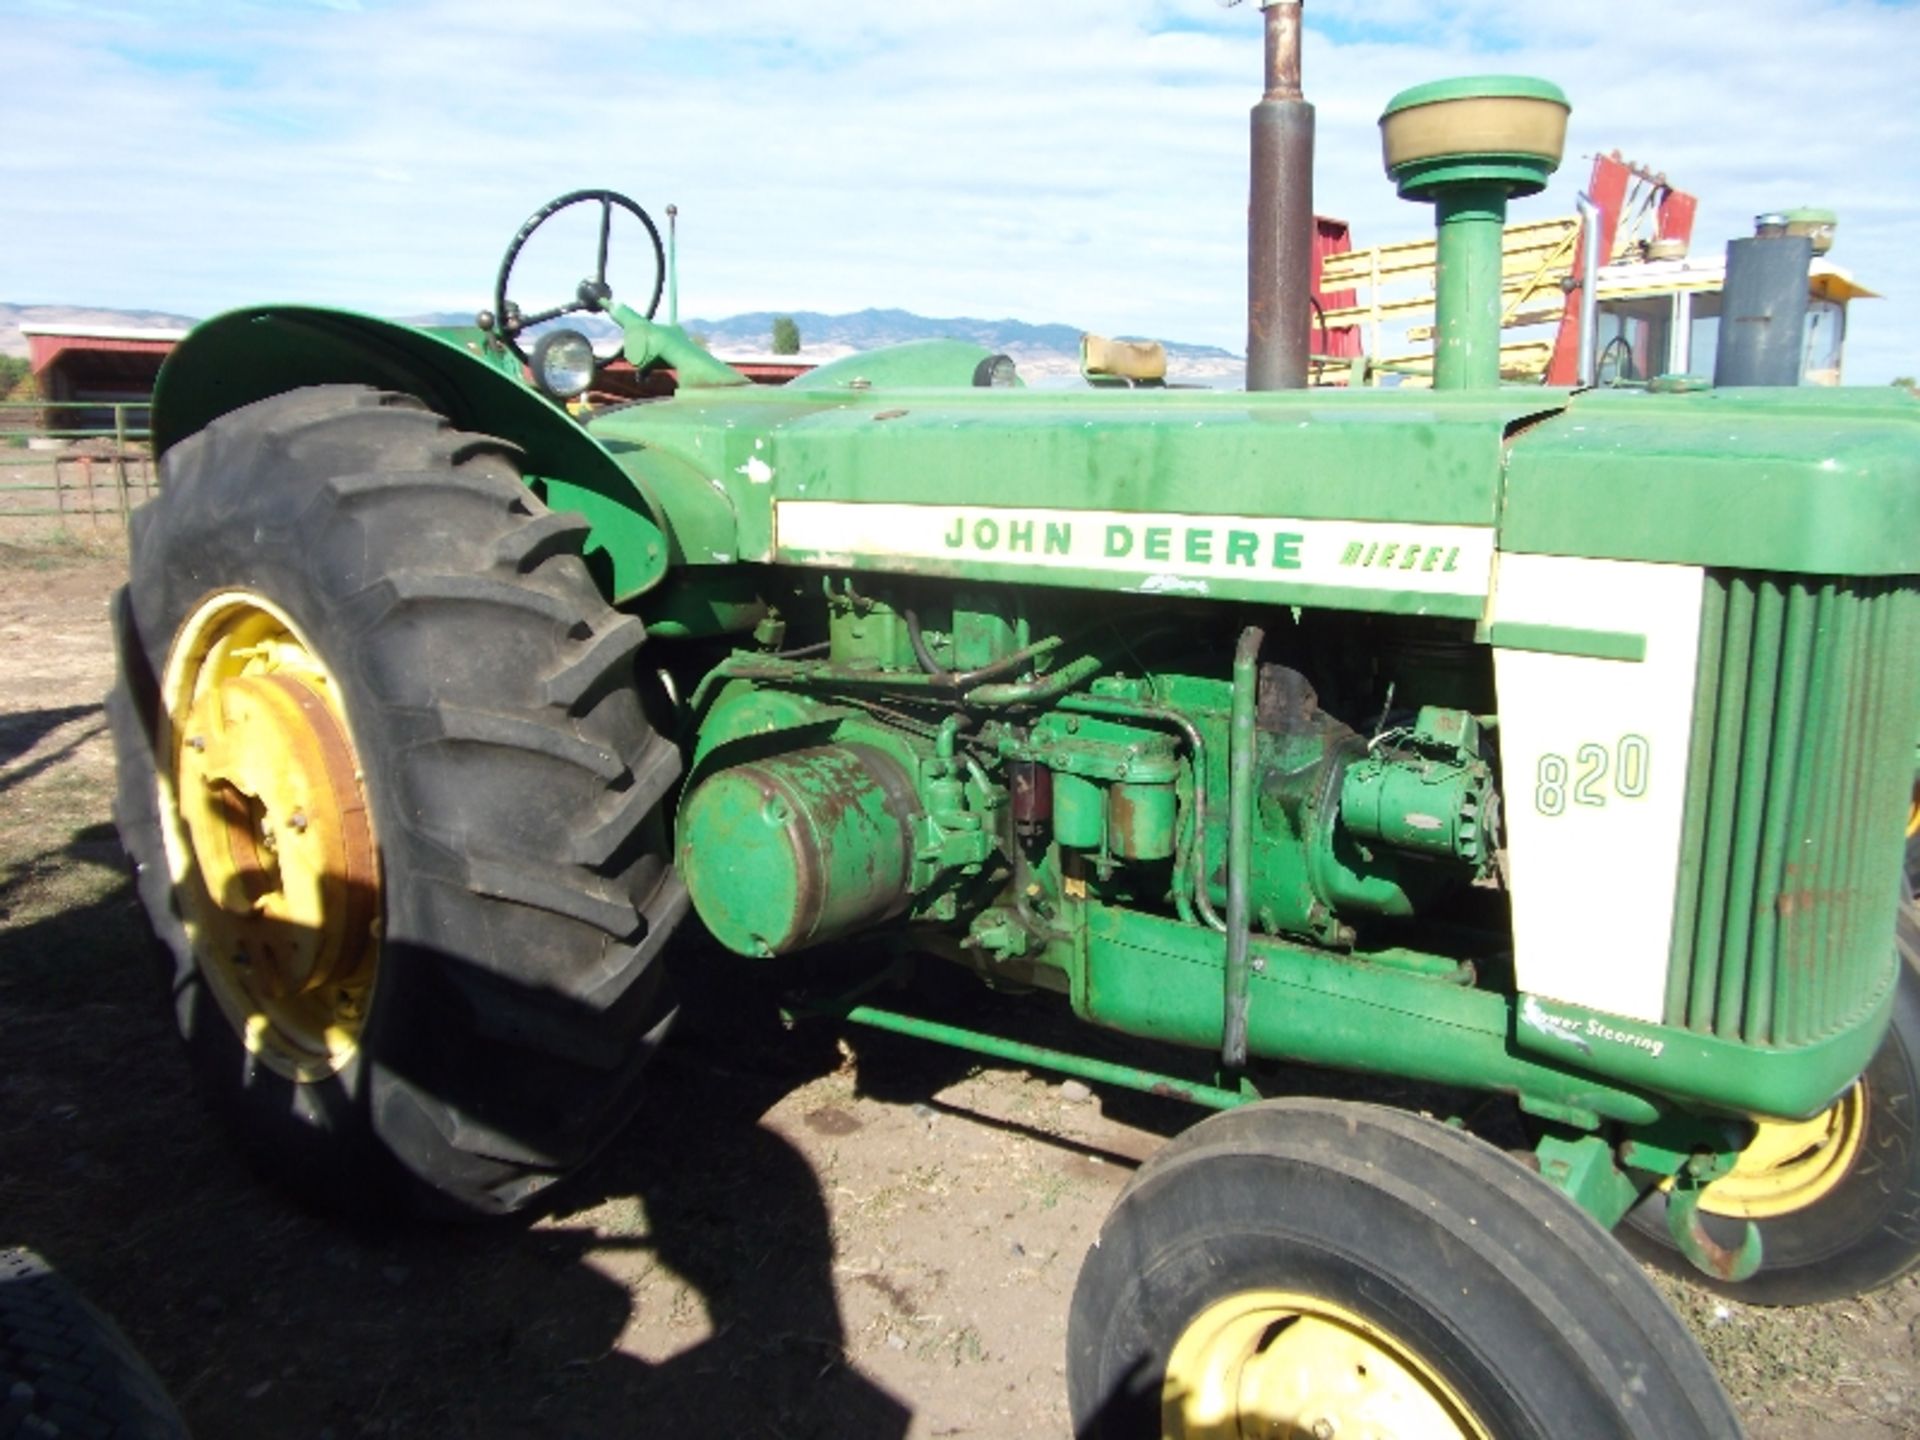 JD 820 diesel power steering 2 hyd remotes wide front pony start ser# 820491A 5299 hrs - Image 2 of 11